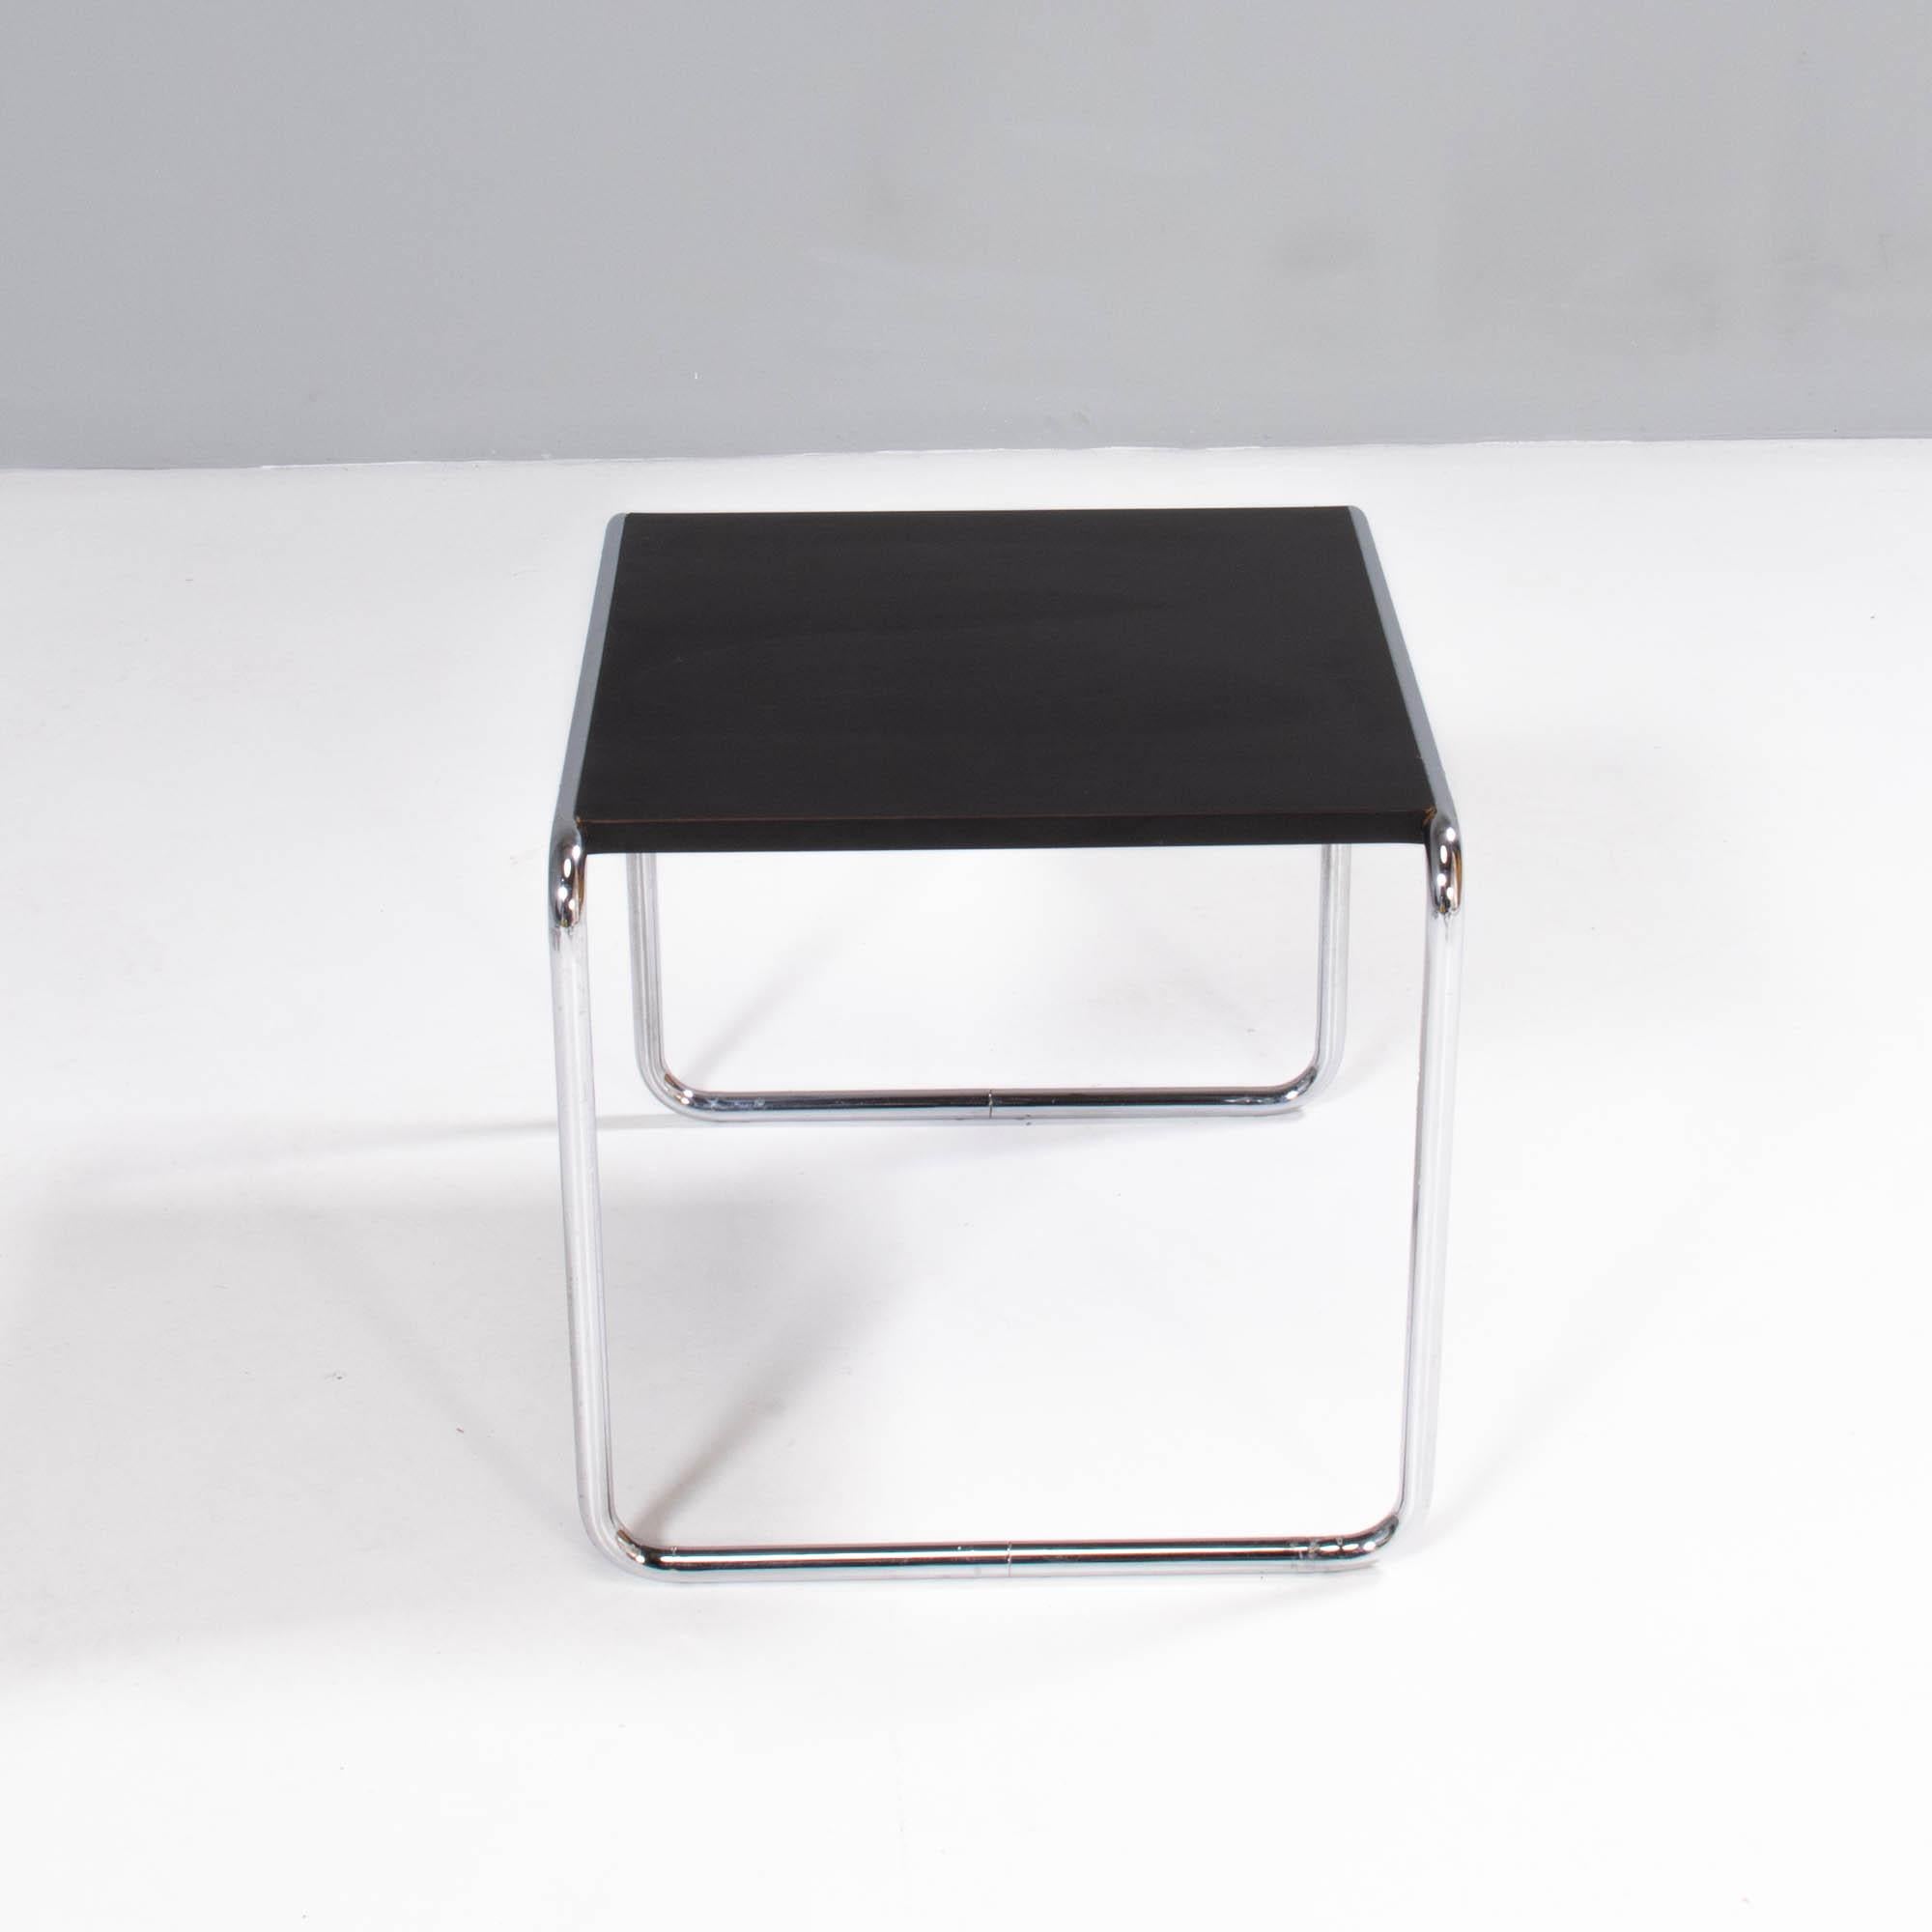 Originally designed by Marcel Breuer in 1925, the Laccio side table has become a true design icon.

Using the tubular steel of his other designs, the Laccio side table features Breuer’s famous blend of curves and sleek lines.

The polished